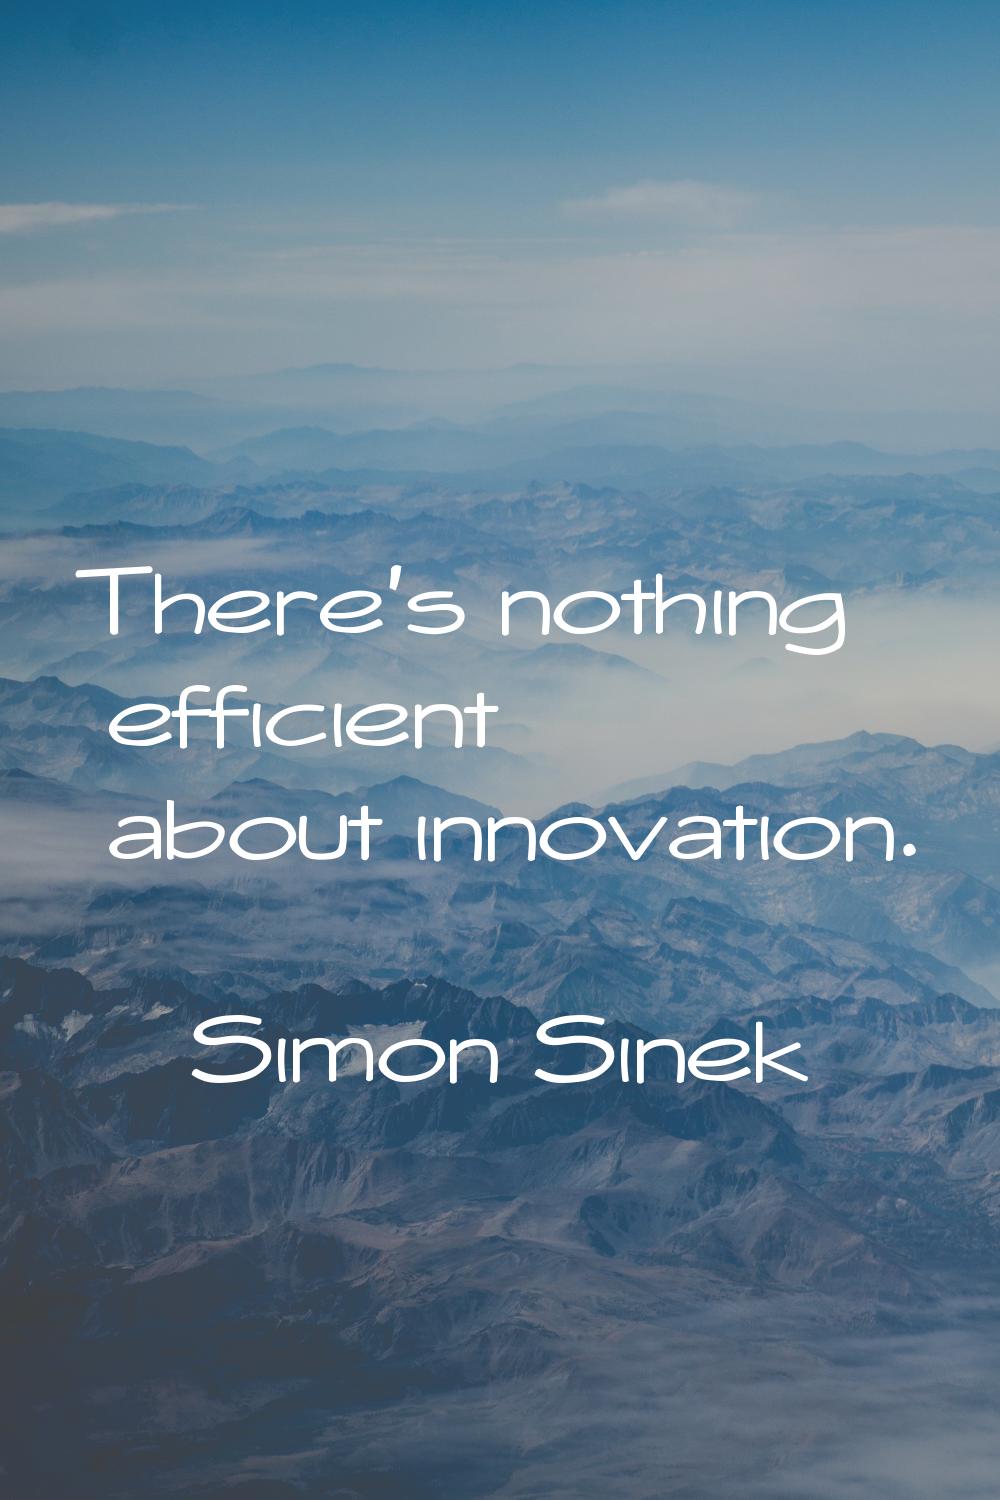 There's nothing efficient about innovation.